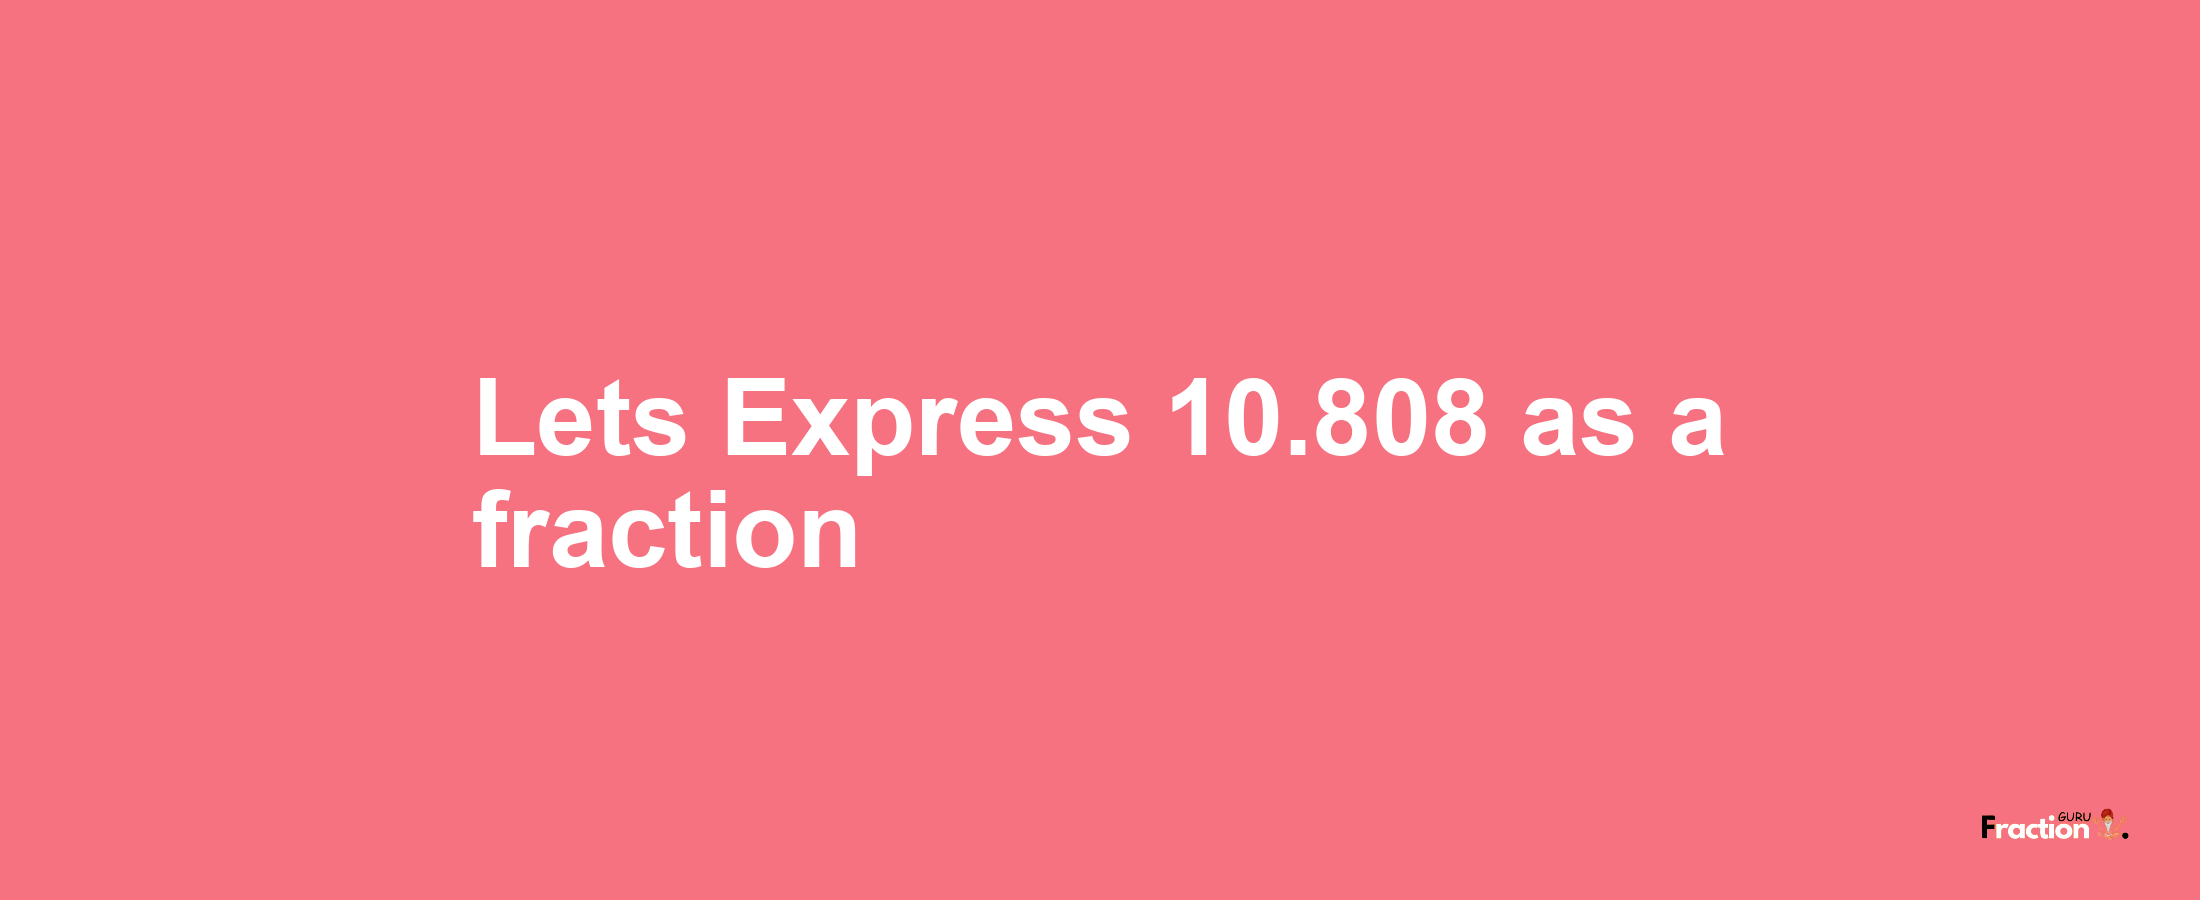 Lets Express 10.808 as afraction